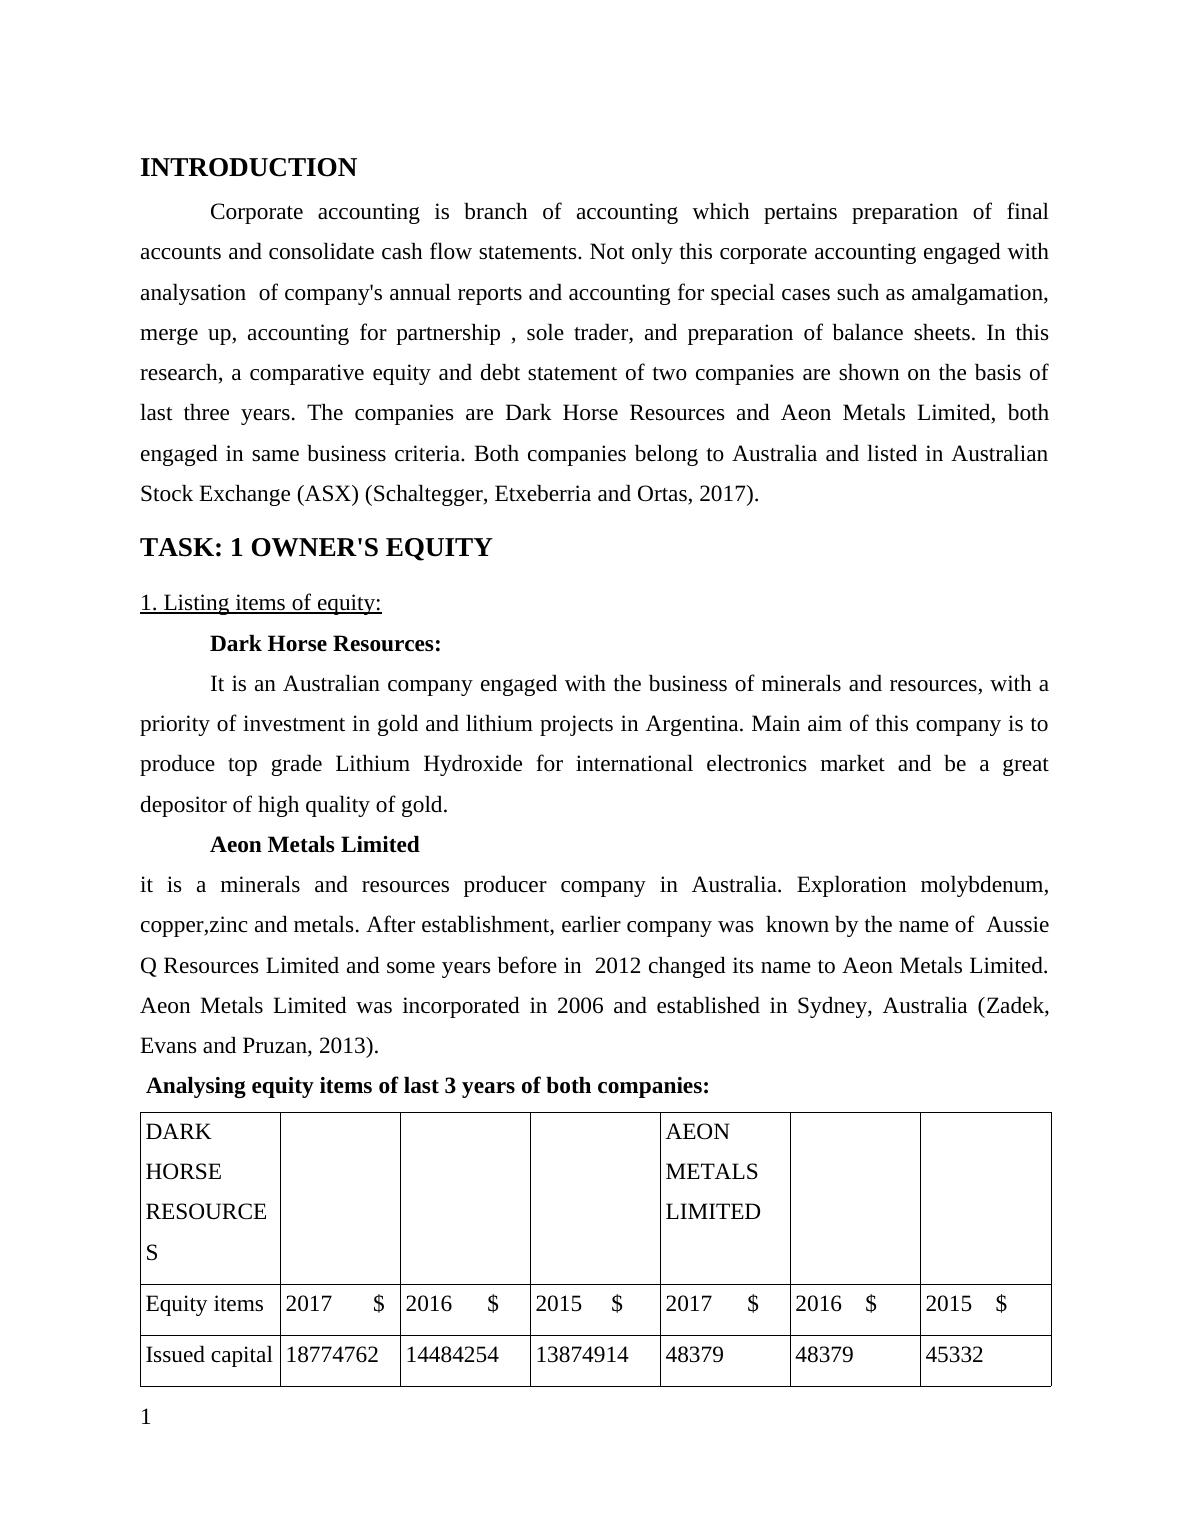 Comparative analysis of equity and debt position_3